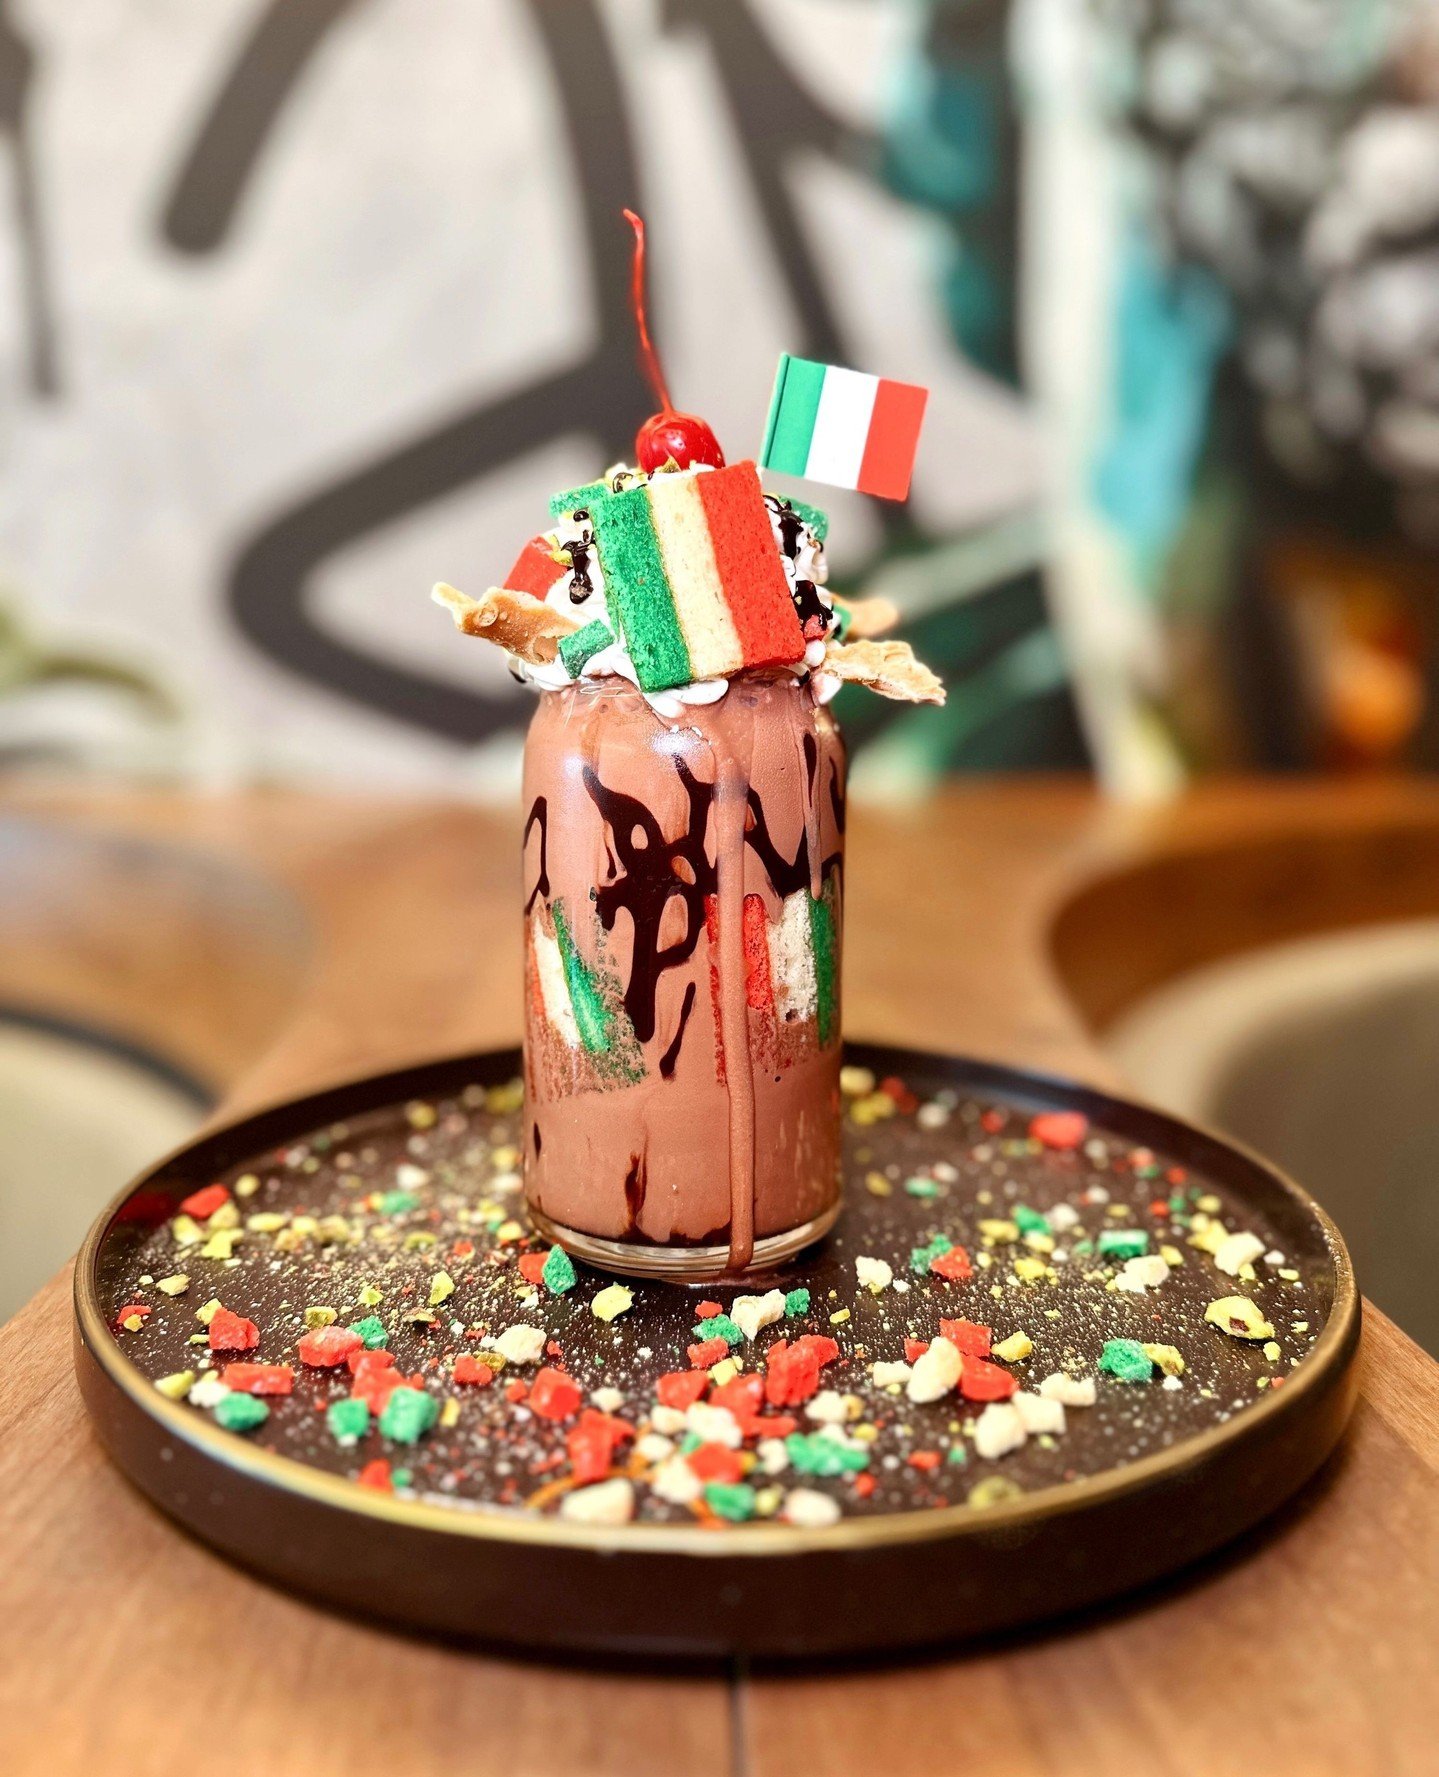 Have you tried the May Shake of The Month yet? 👀⁠
⁠
You absolutely must cause this one is 🔥⁠
⁠
The Italian Flag Cookie Milkshake 🇮🇹🤌🏼⁠
Cannoli crumb + Chocolate sauce + Italian flag cookies + chocolate gelato milkshake + whipped cream + Italian